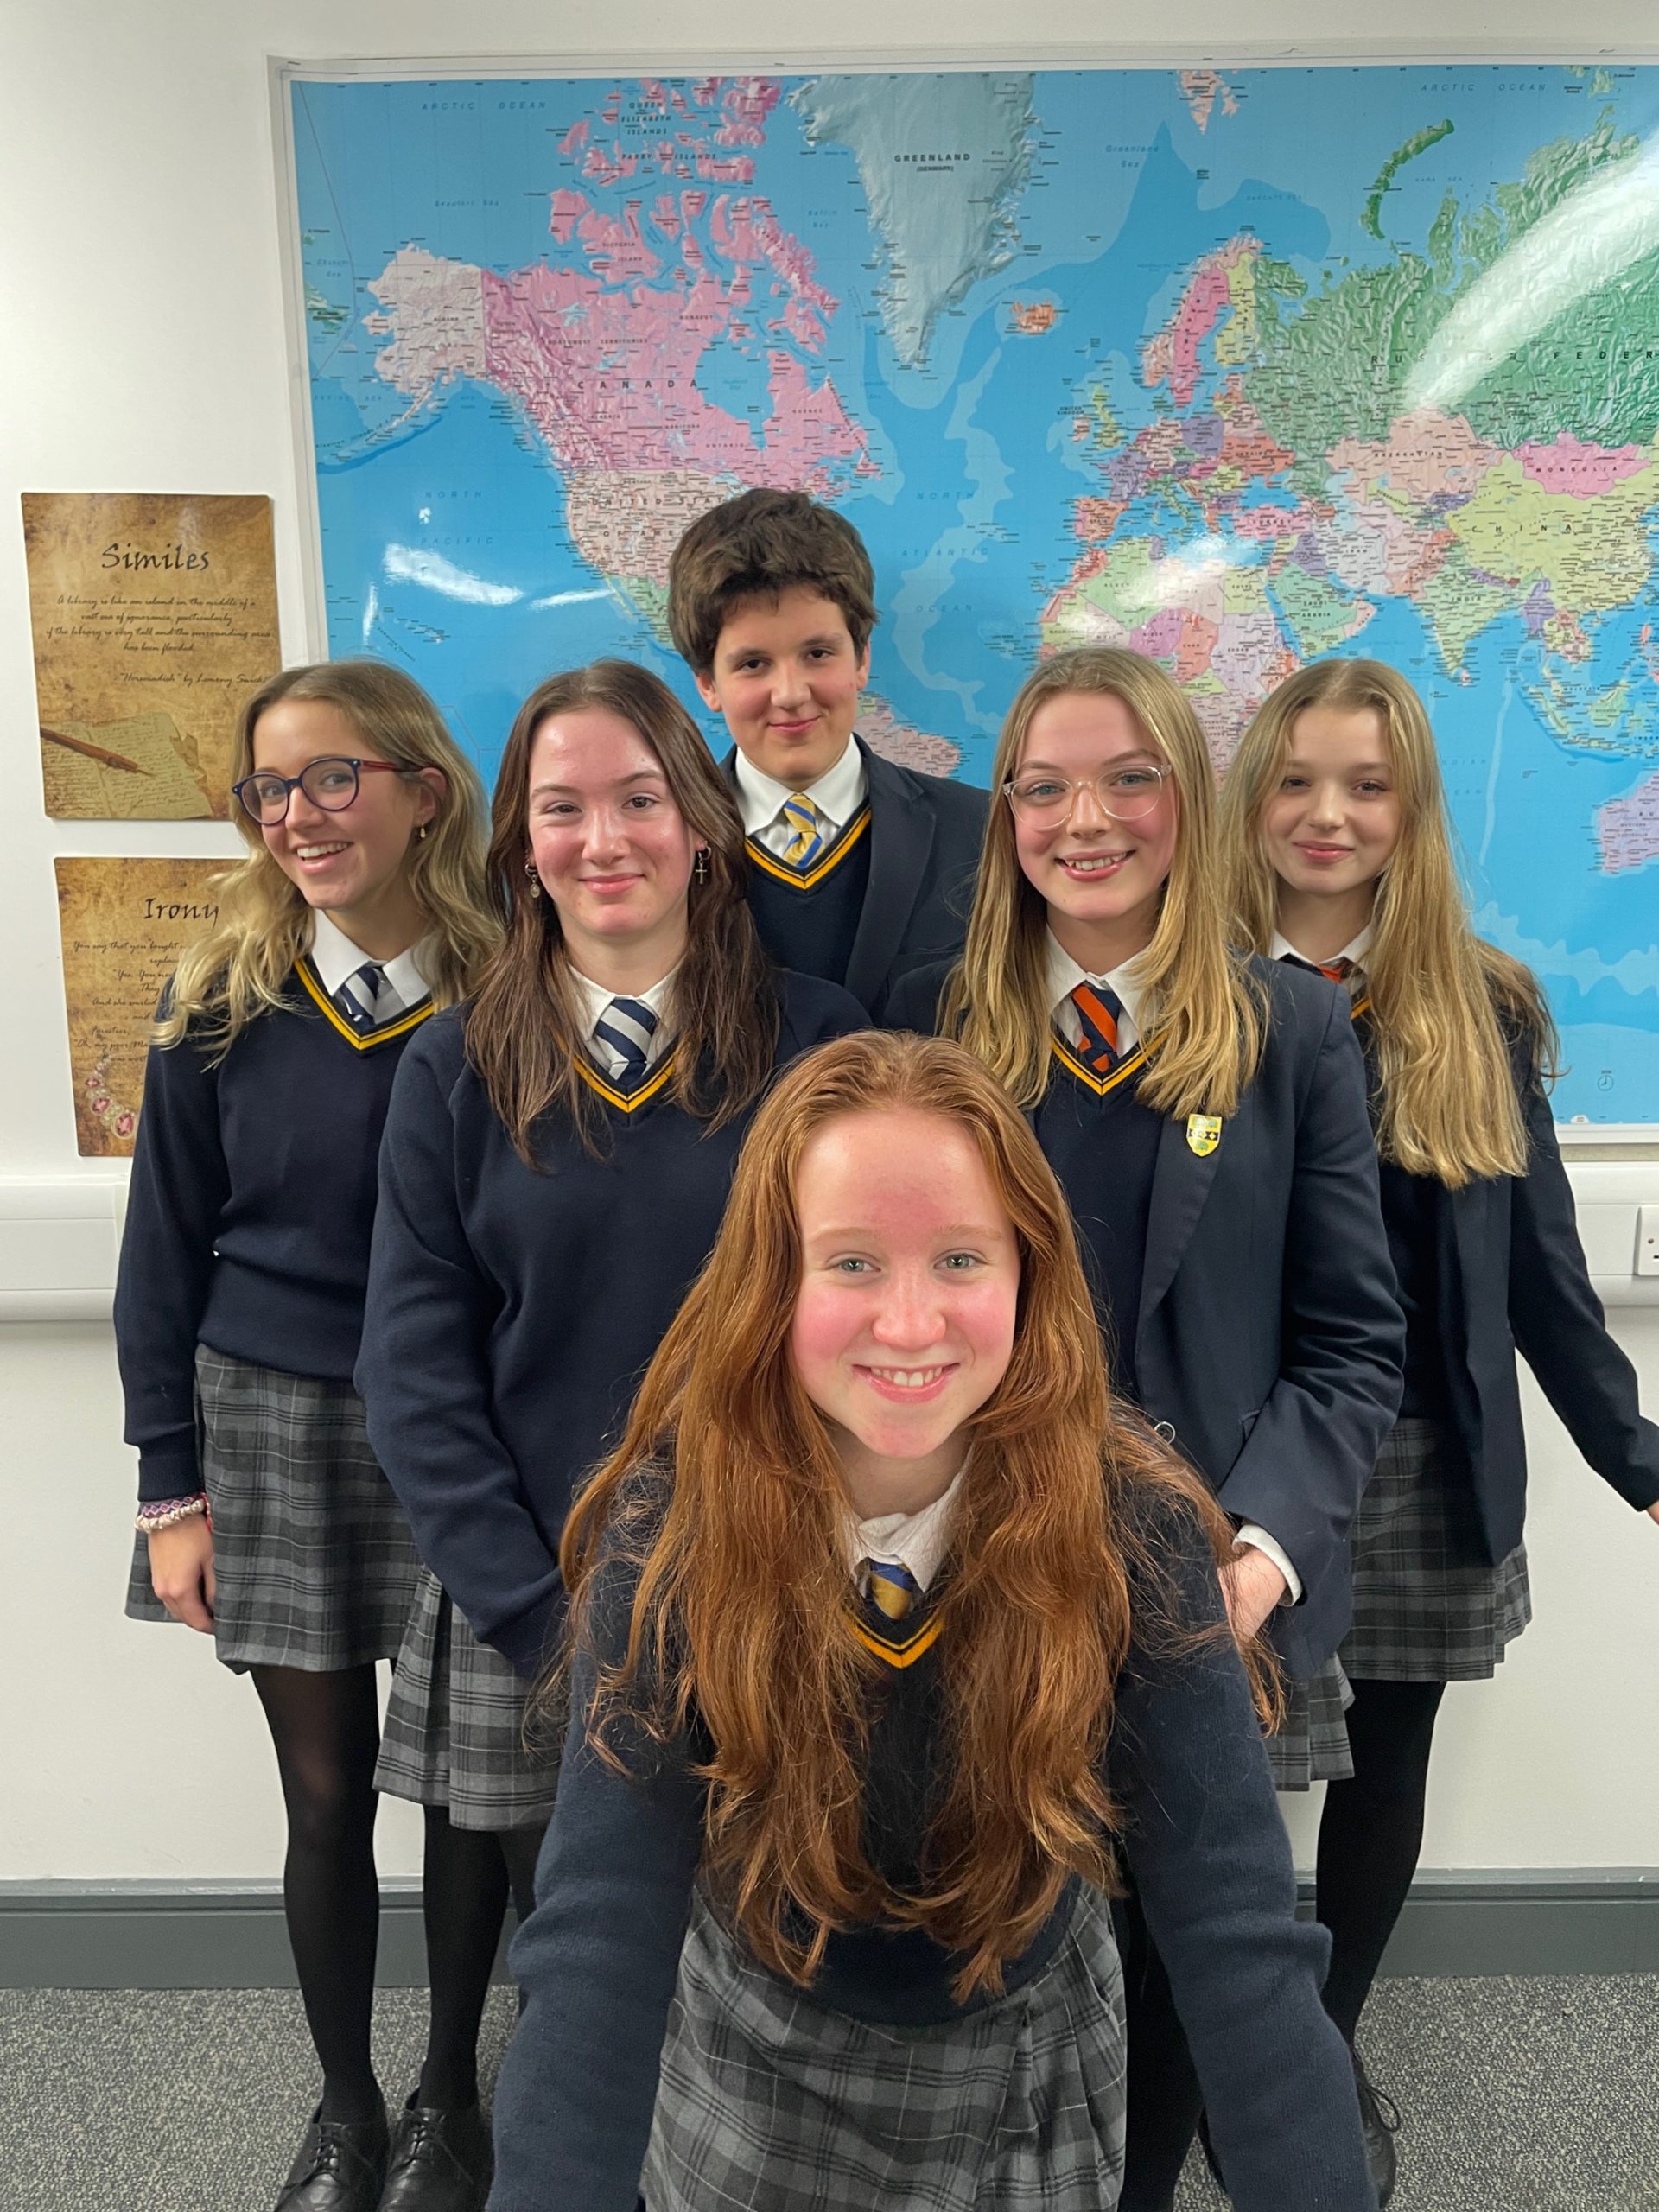 Cokethorpe Public Speaking AOB teams for the ESU Public Speaking competition first round - Latest News group photo